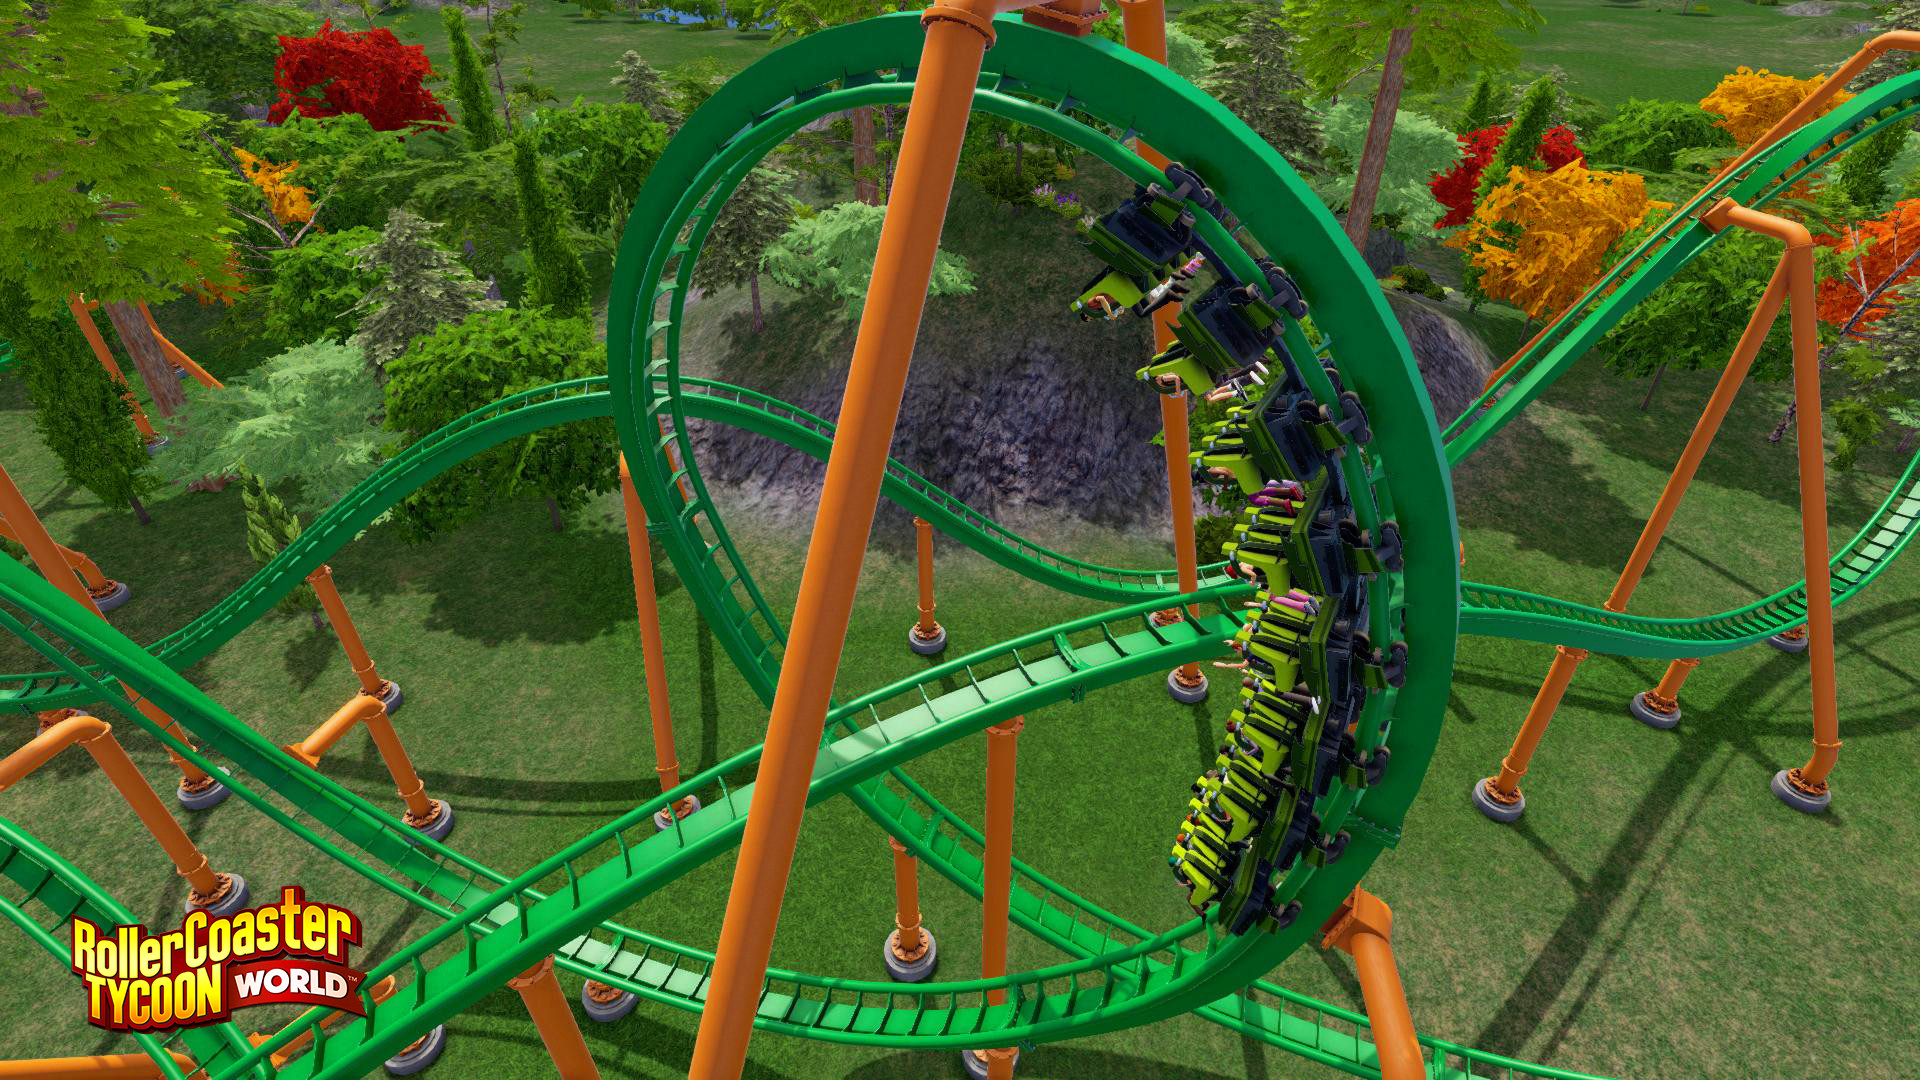 RollerCoaster Tycoon World System Requirements